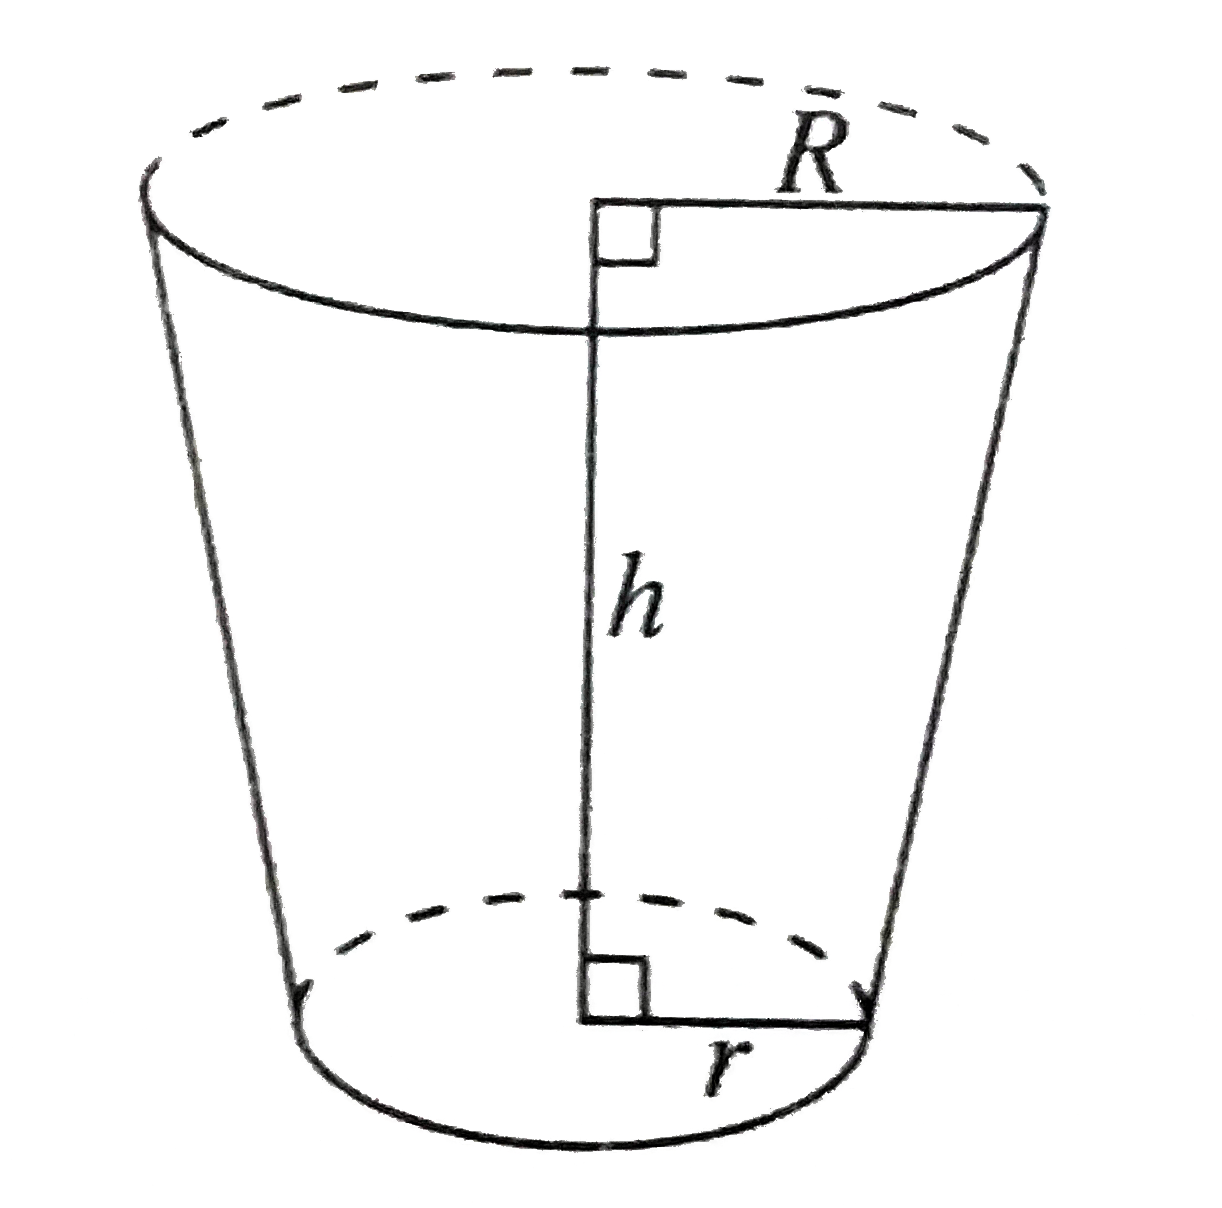 The  volume of a  right  circular  cone  with  the bottom  removed  to create  a flat  base  can be  calculated  with the  following  equation  : V= (1)/(3)  pi h ( R^(2) +r ^(2) +Rr),  where  h represents  the height  of the  shape  and R  and r  represent its  radii , as shown  in the figure  below  :      THis  formula  can be  determine  the capacity  of a  large  coffee  mug  .Approximately  how  many  cubic  inches  of liquid  can  the cup  shown  below  hold  if it  is filled  to the  brium  and its  handle  holds  no liquid ?